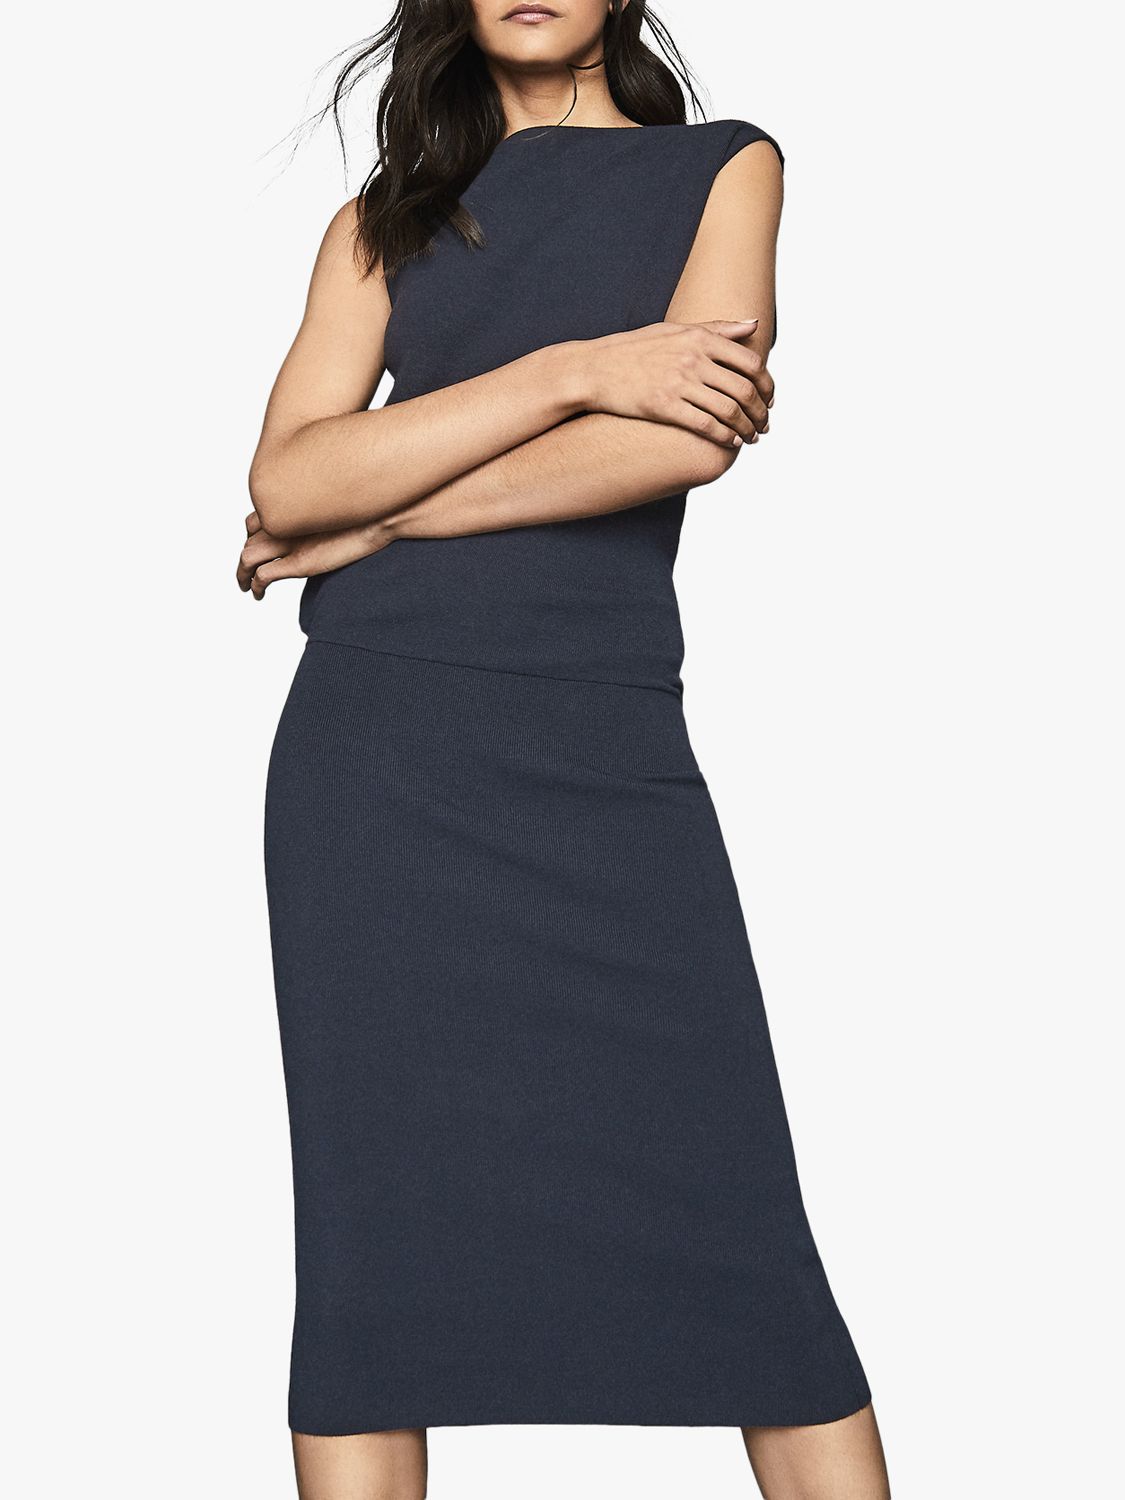 Reiss Claudine Draped Knitted Dress, Navy